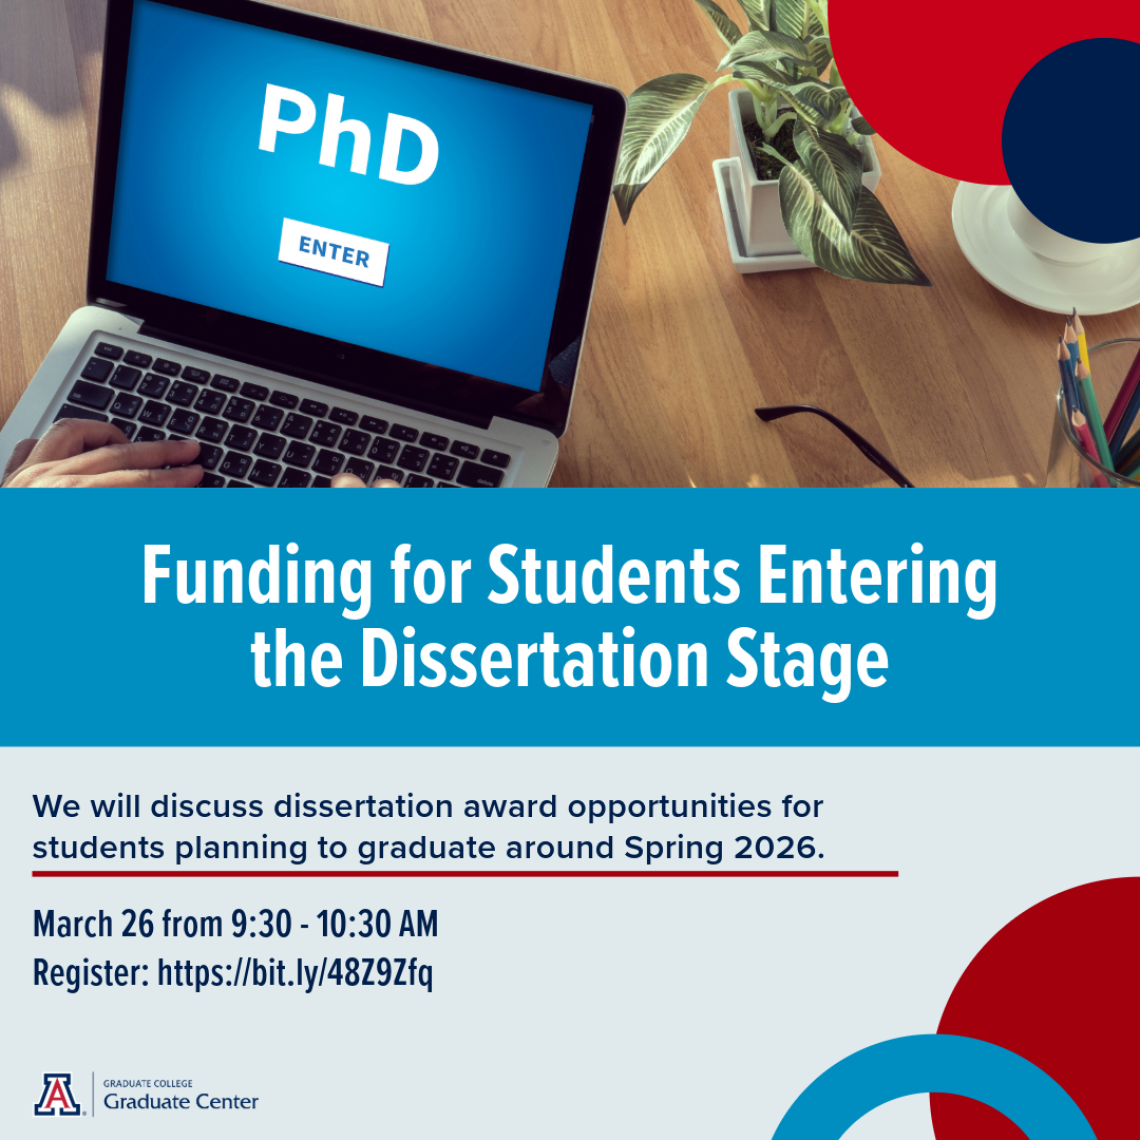 Image showing information about Funding for Students Entering the Dissertation Stage. Same information is available in text underneath. 